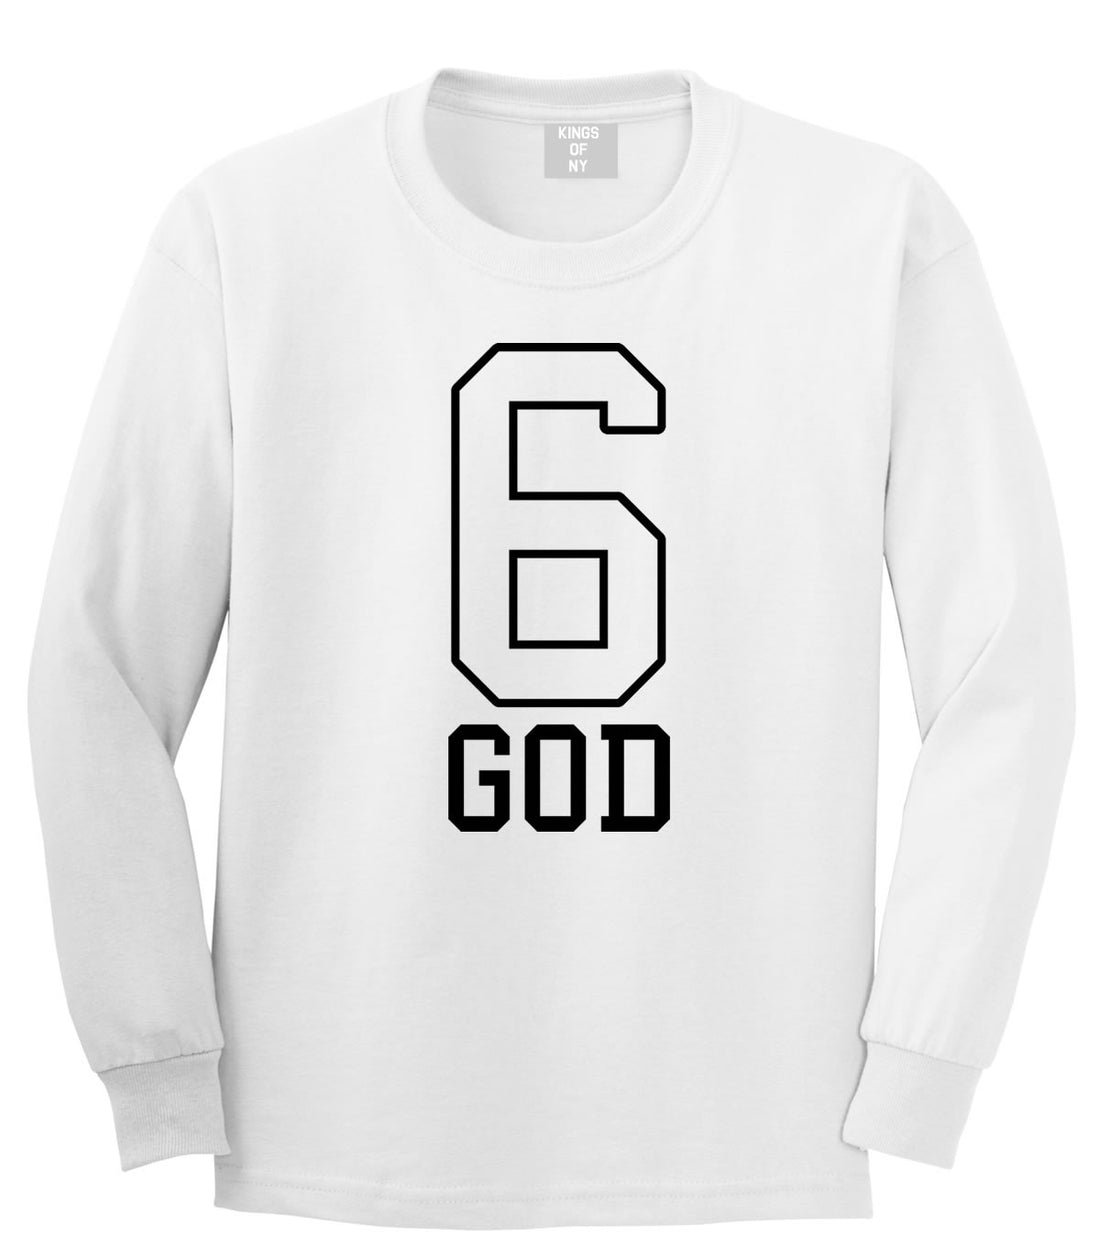 Six 6 God Long Sleeve T-Shirt in White By Kings Of NY